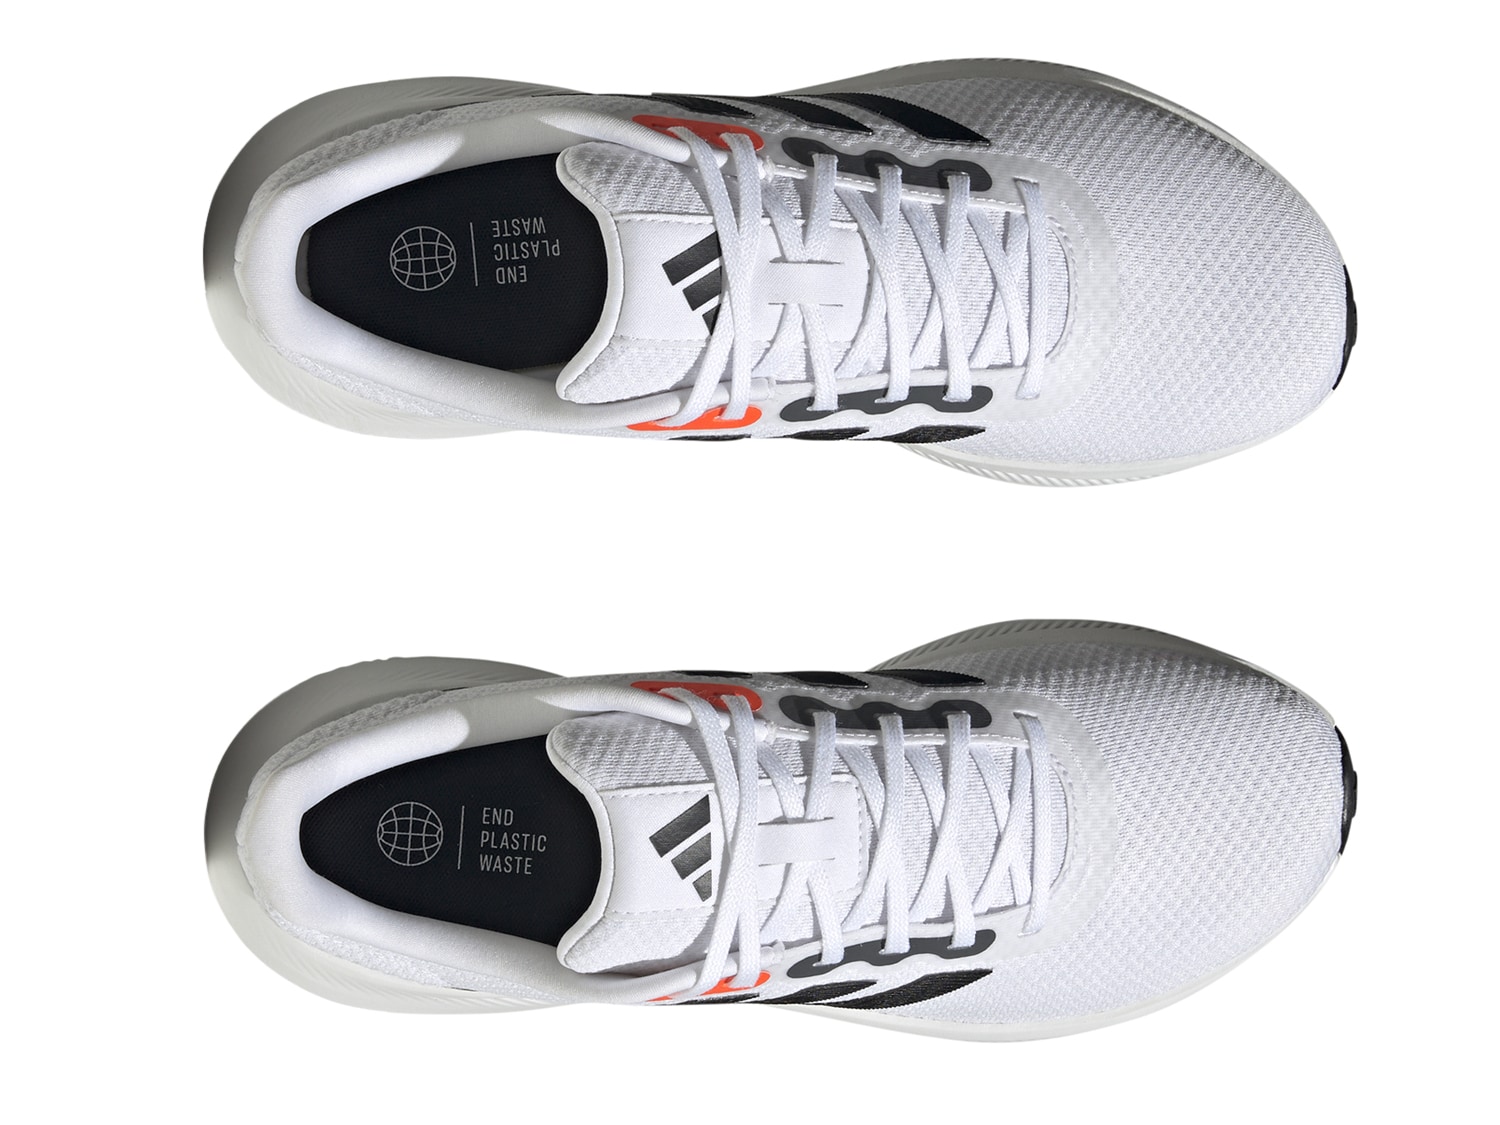 adidas sports shoes for men